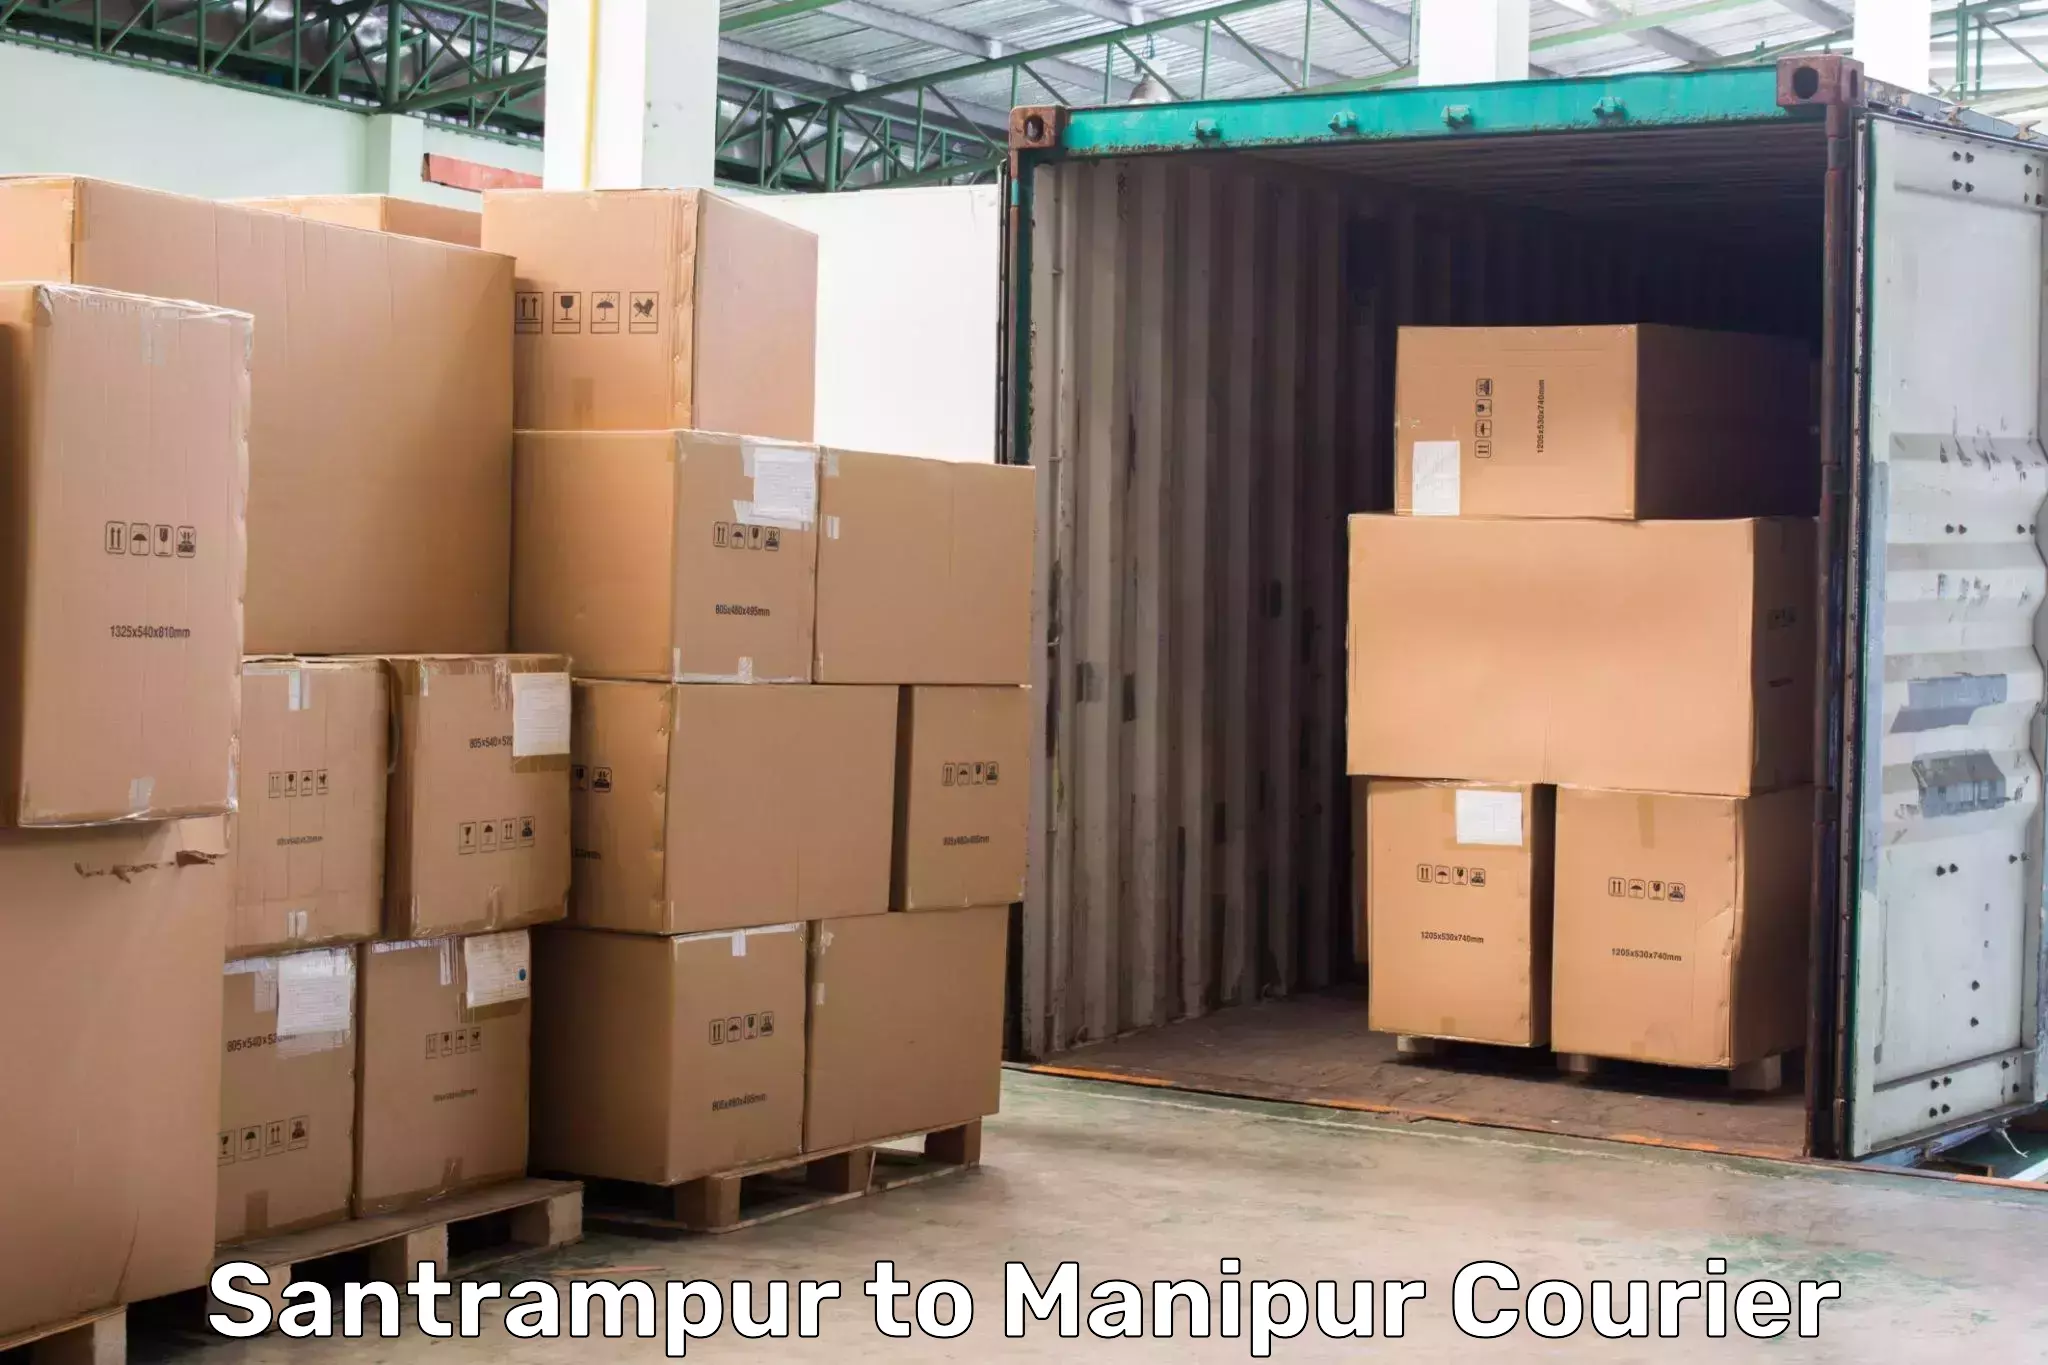 Courier service partnerships Santrampur to Chandel